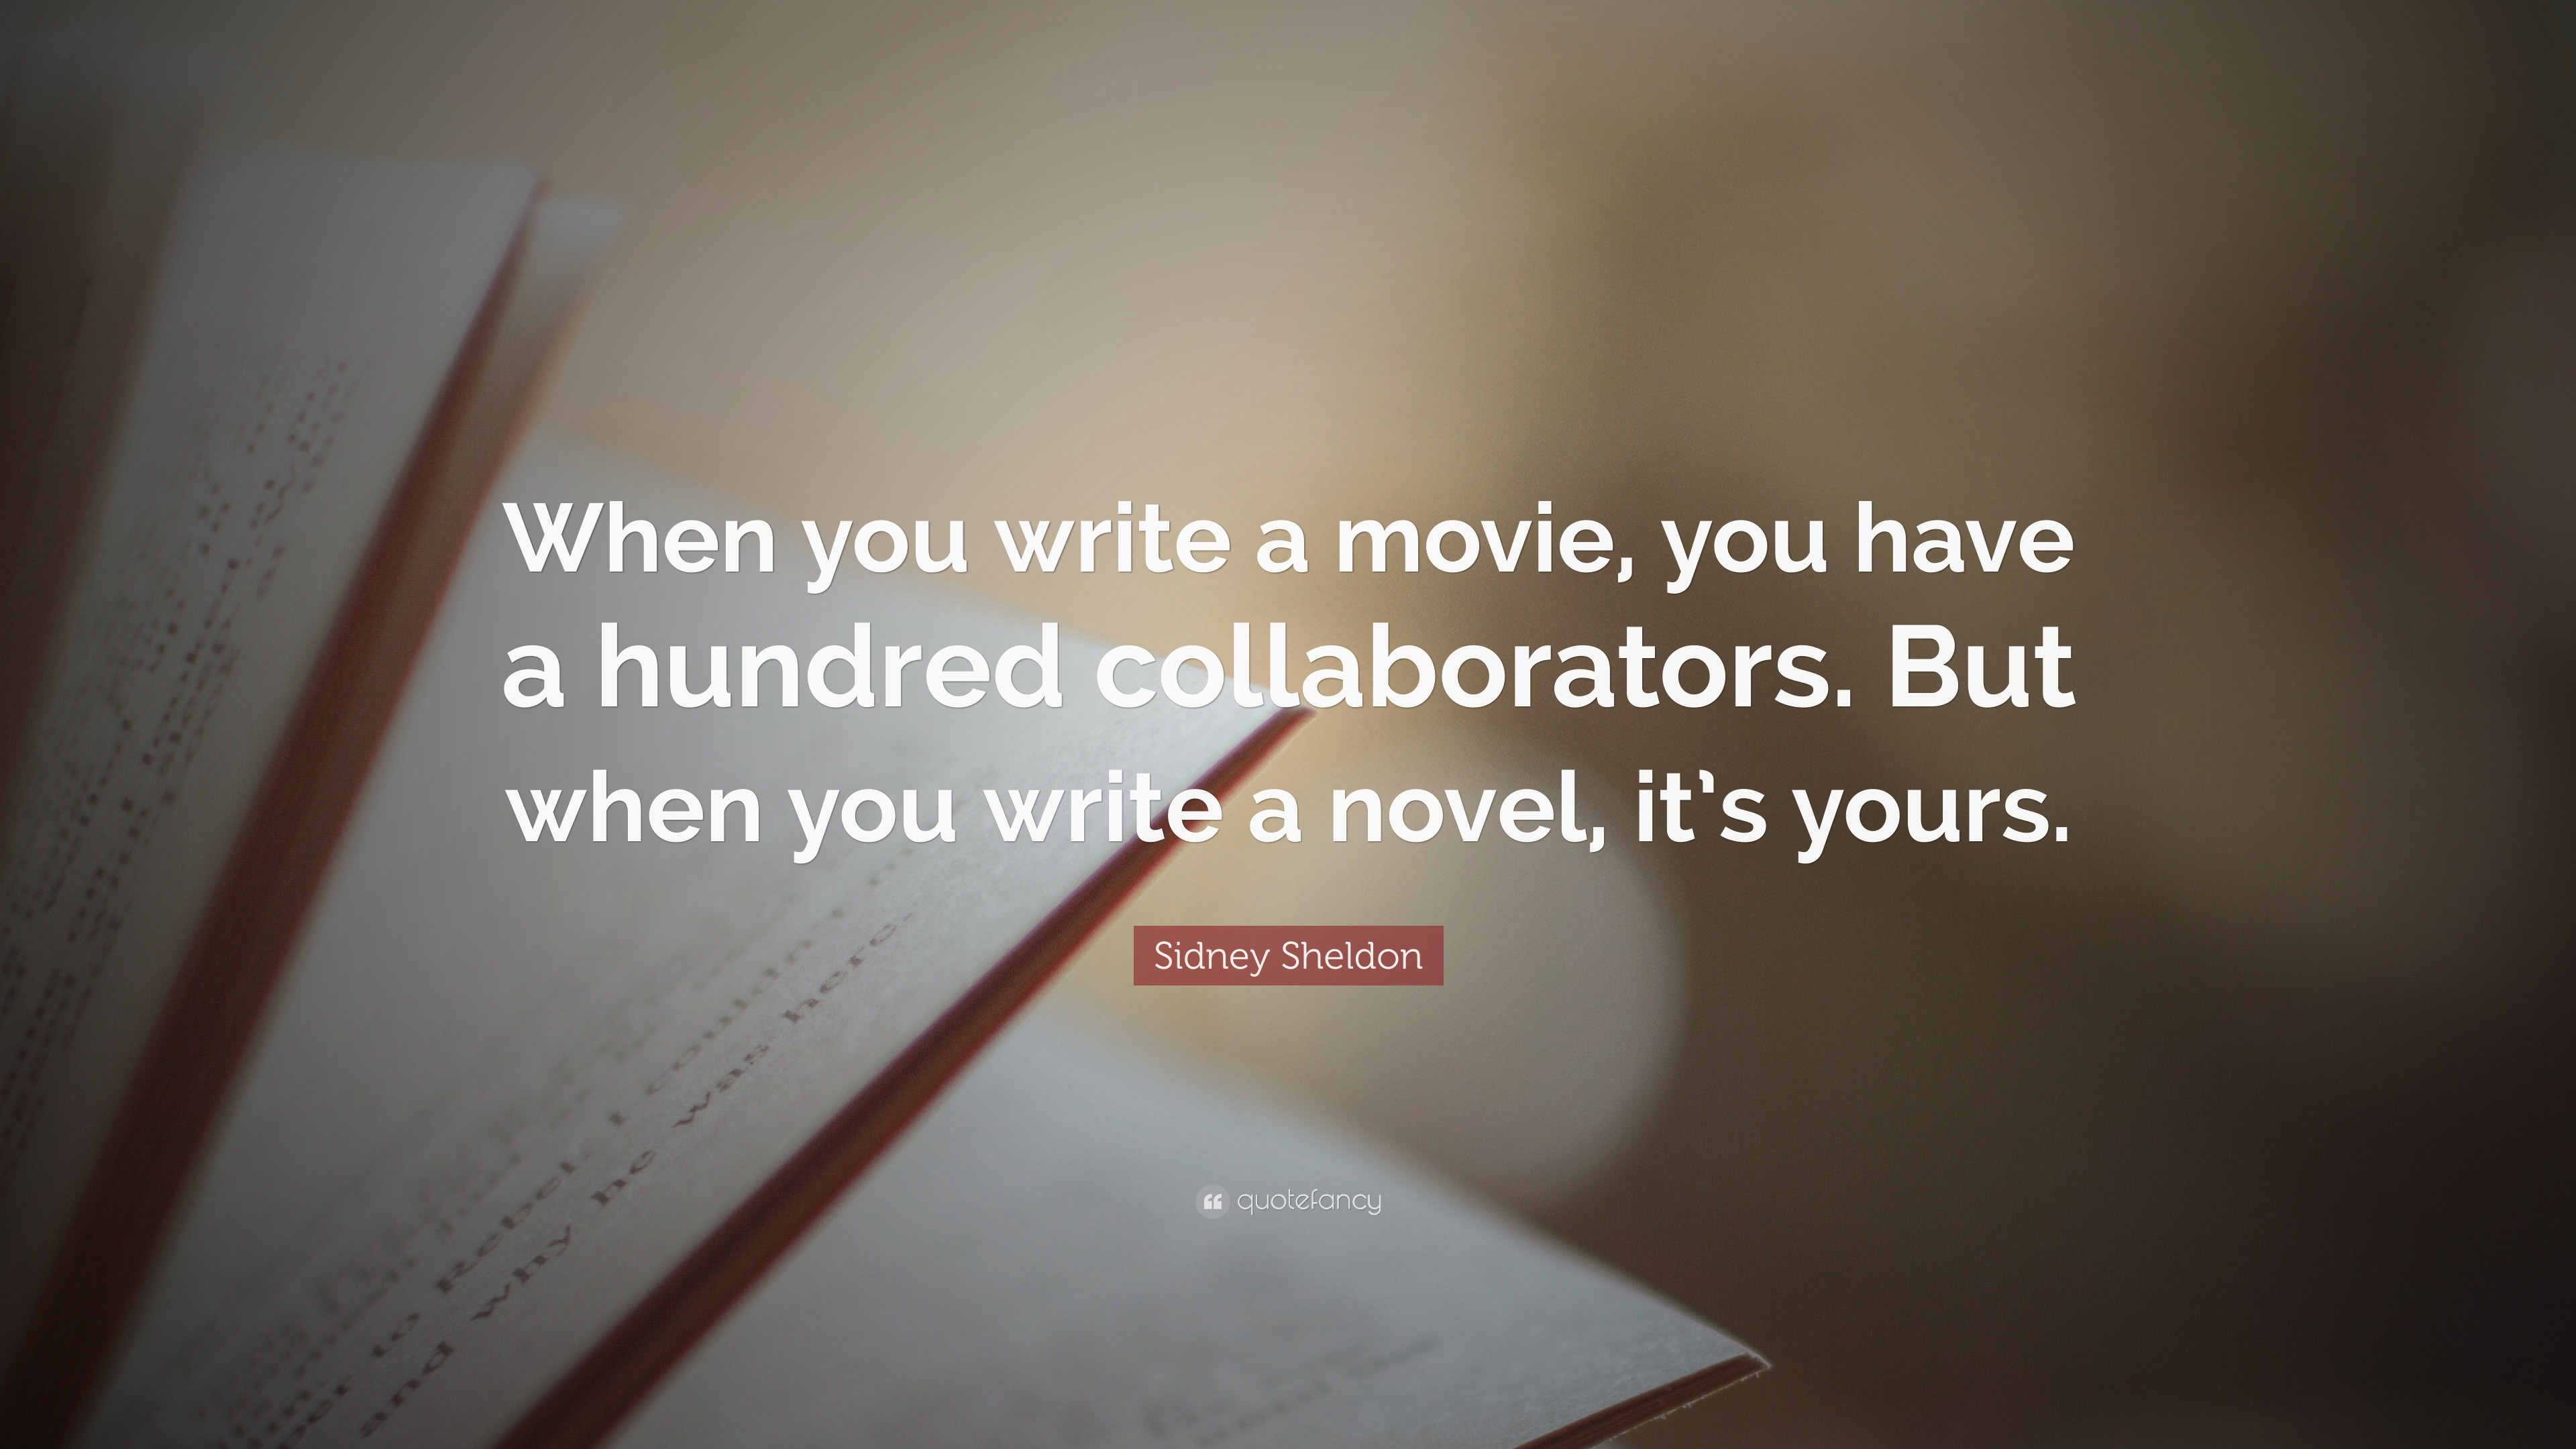 Sidney Sheldon Quote: “When you write a movie, you have a hundred